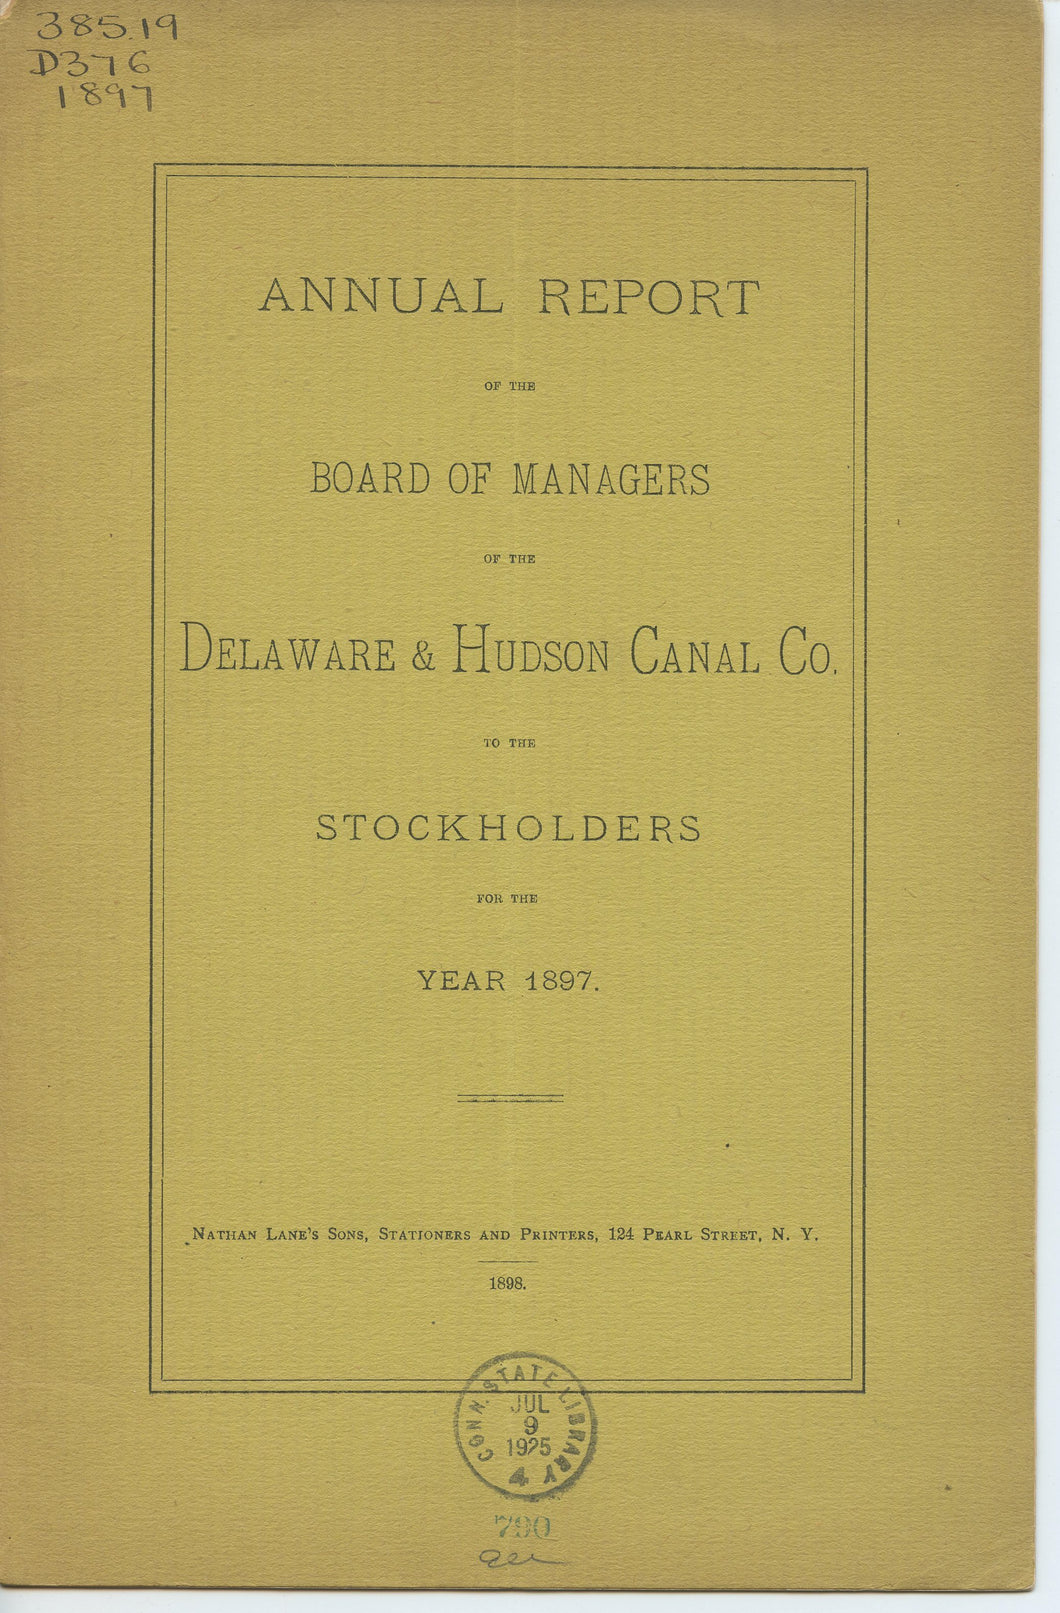 Annual Report of the Board of Managers of the Delaware & Hudson Canal Co. to the Stockholders, for the Year 1897